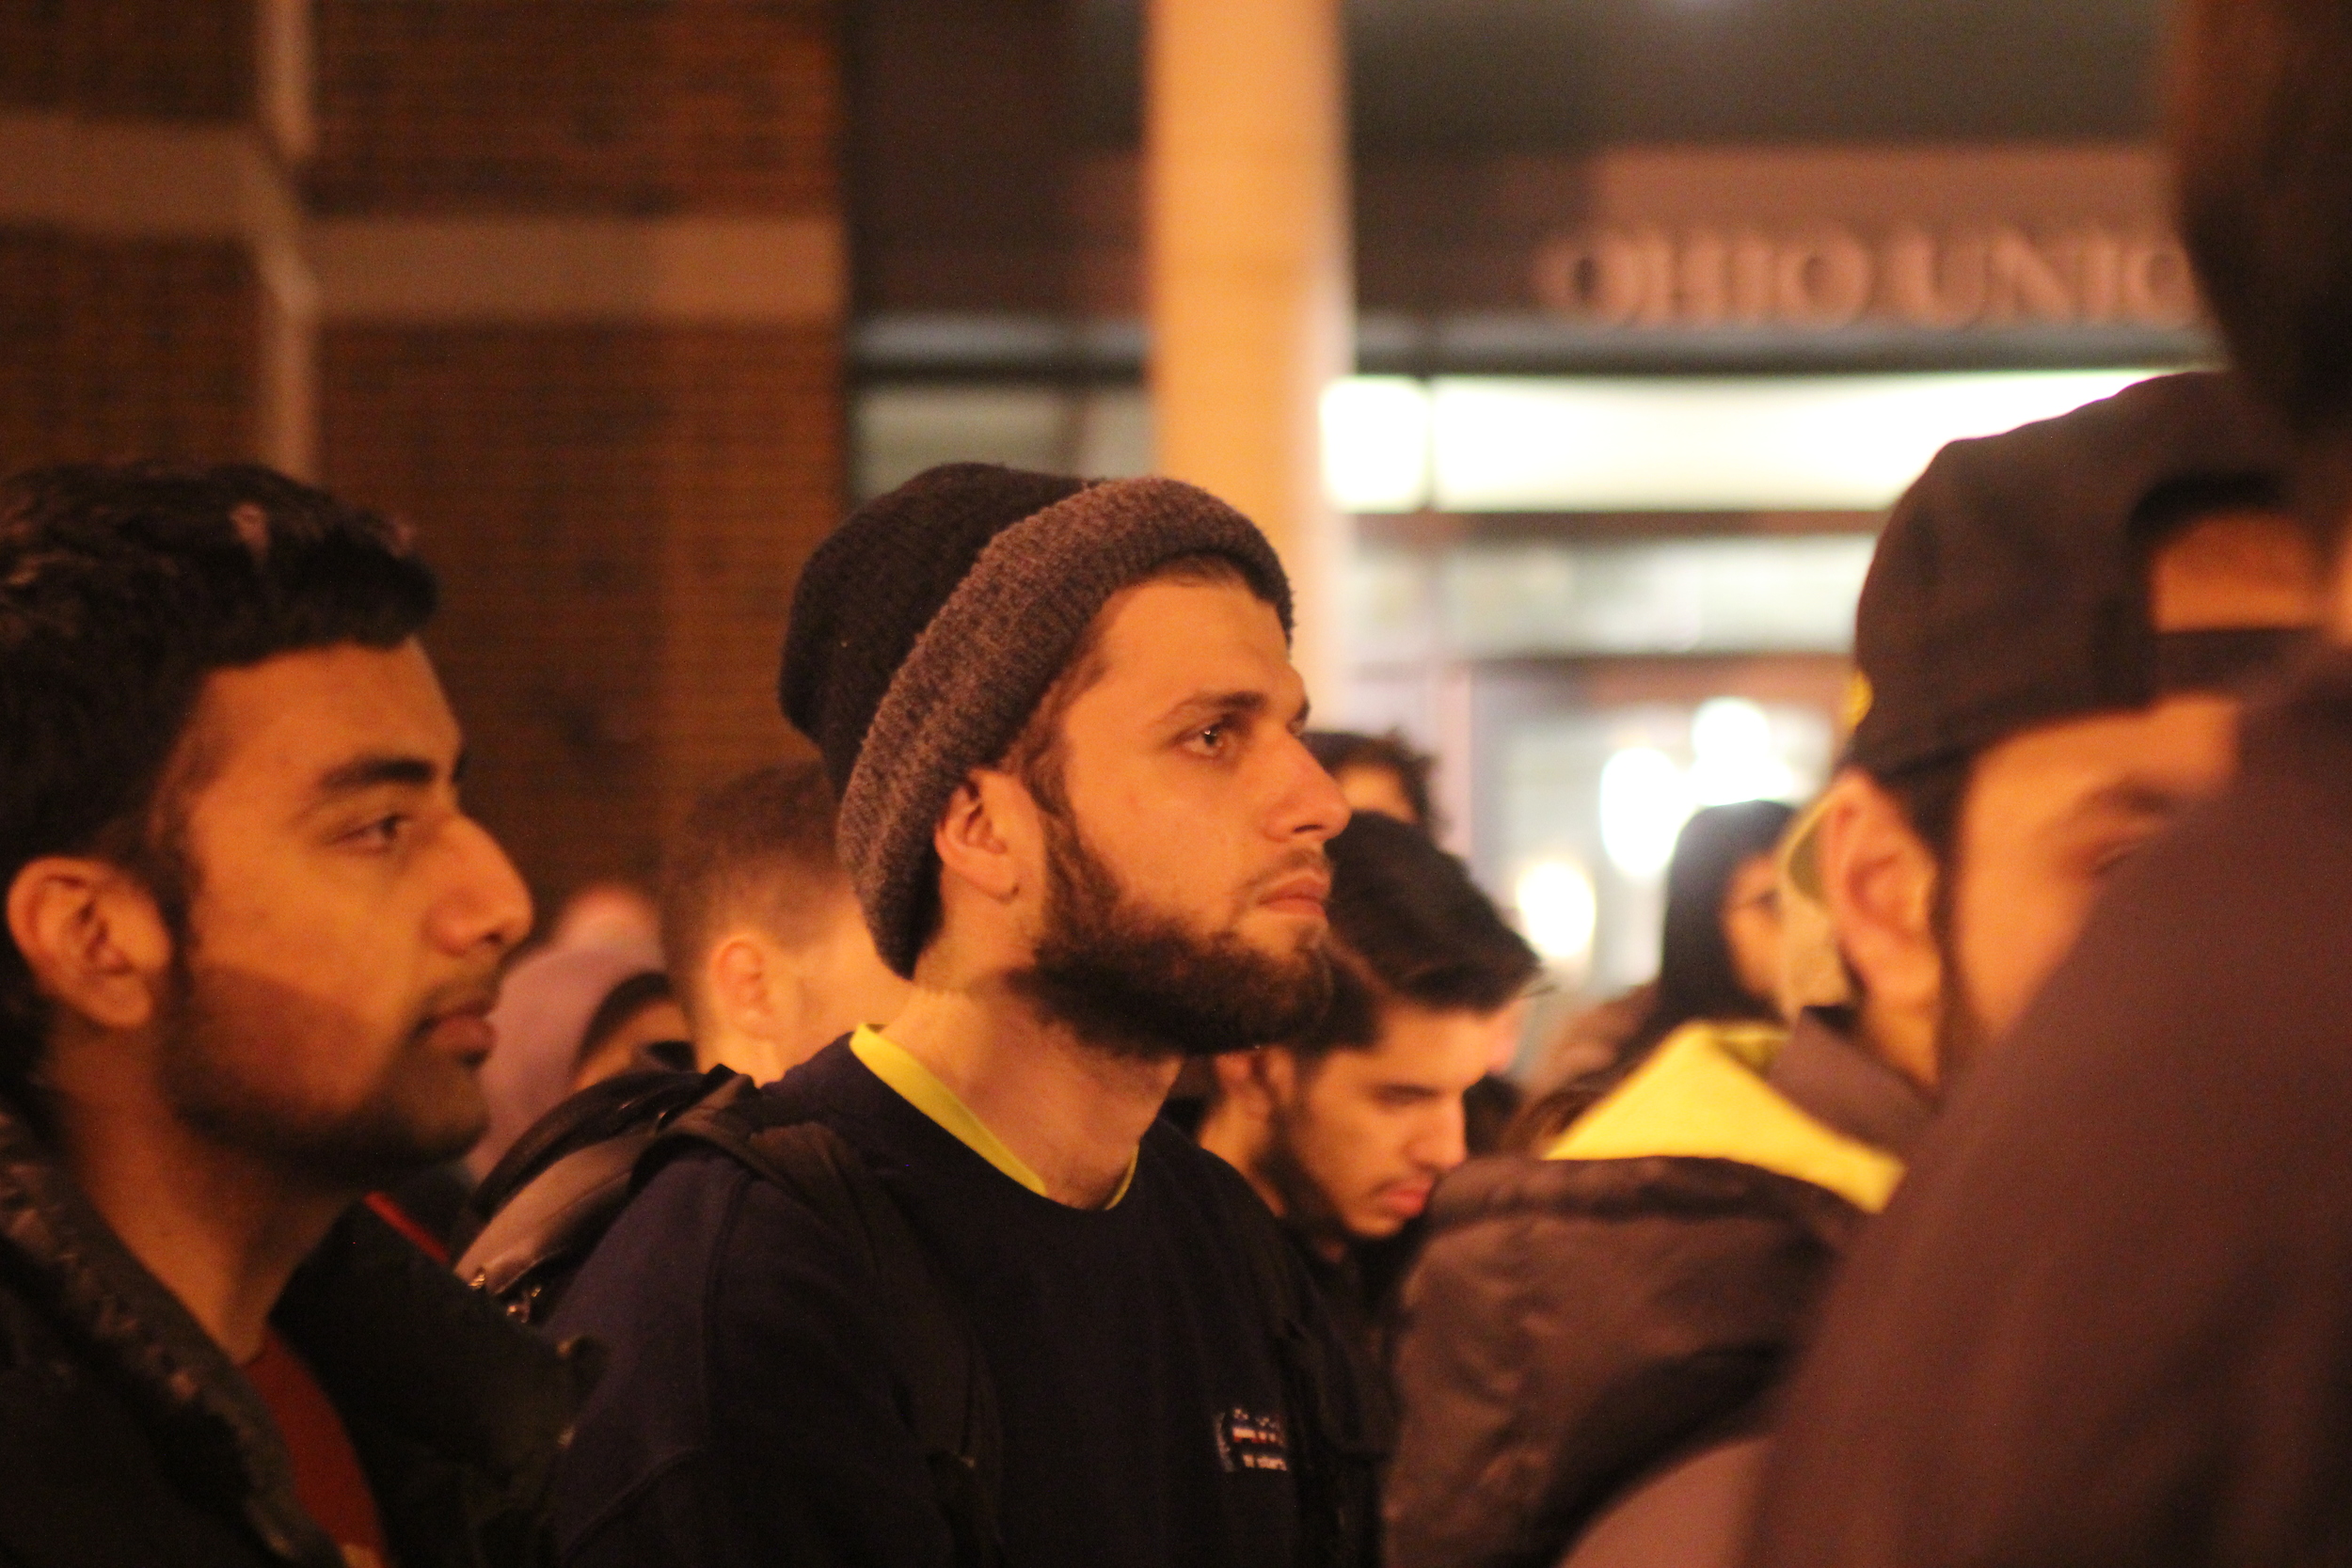   Mohammad Ahmed Mohammad, an alumnus from The Ohio State University, attends &nbsp; a candlelight vigil held for the three Muslim Americans, Deah Barakat, Yusor Abu-Salha and Razan Abu-Salha,&nbsp;murdered in Chapel Hill, North Carolina. February, 2